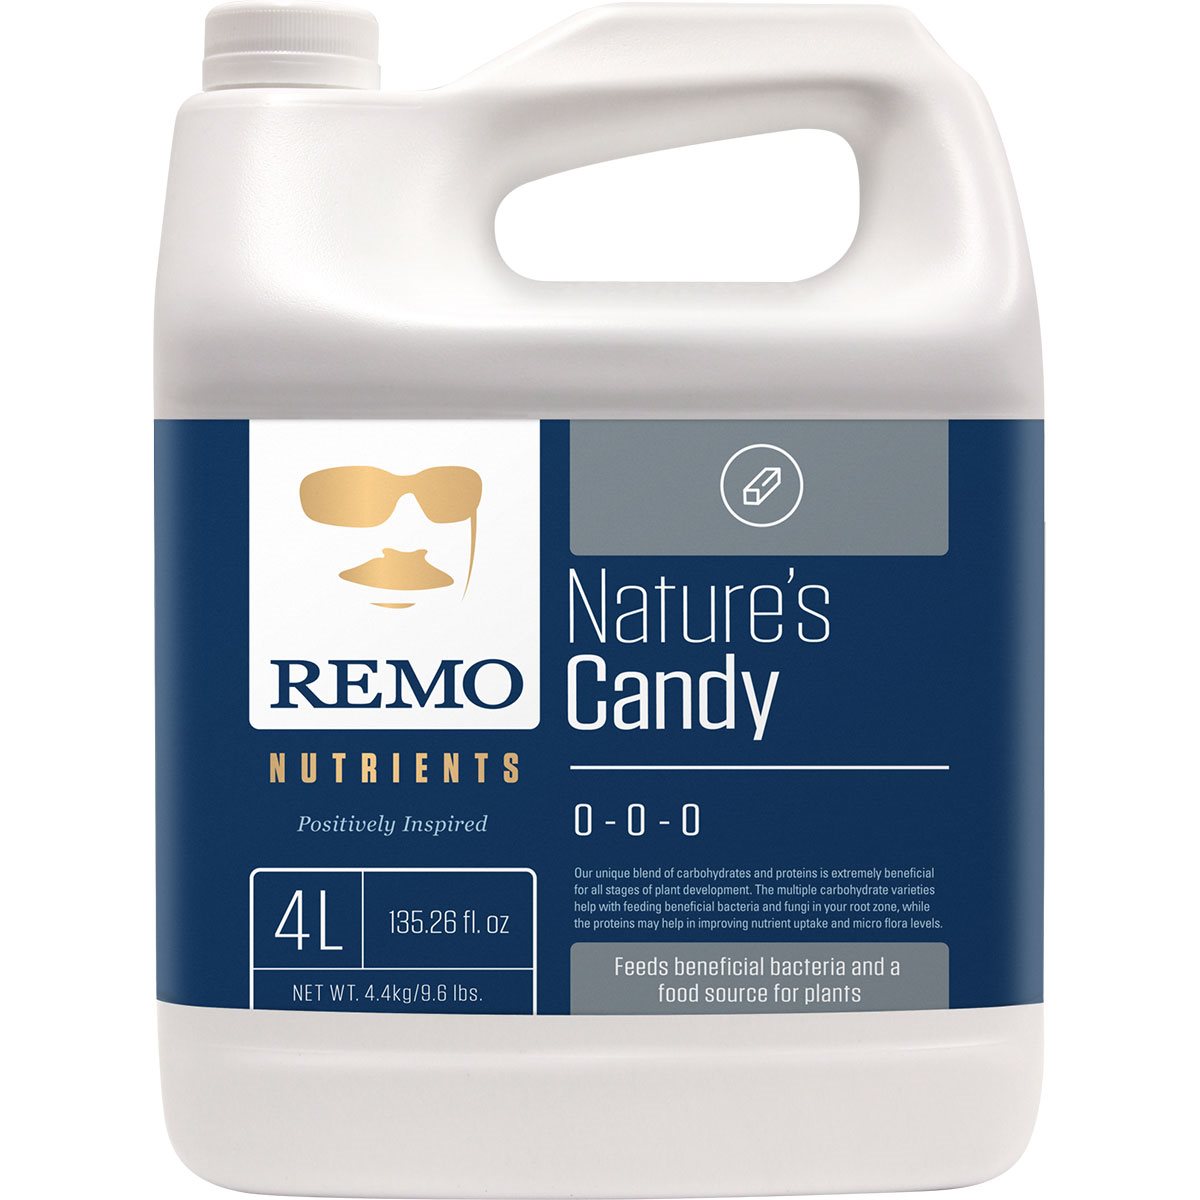 Product Secondary Image:Remo Nutrients Nature's Candy (0-0-0)